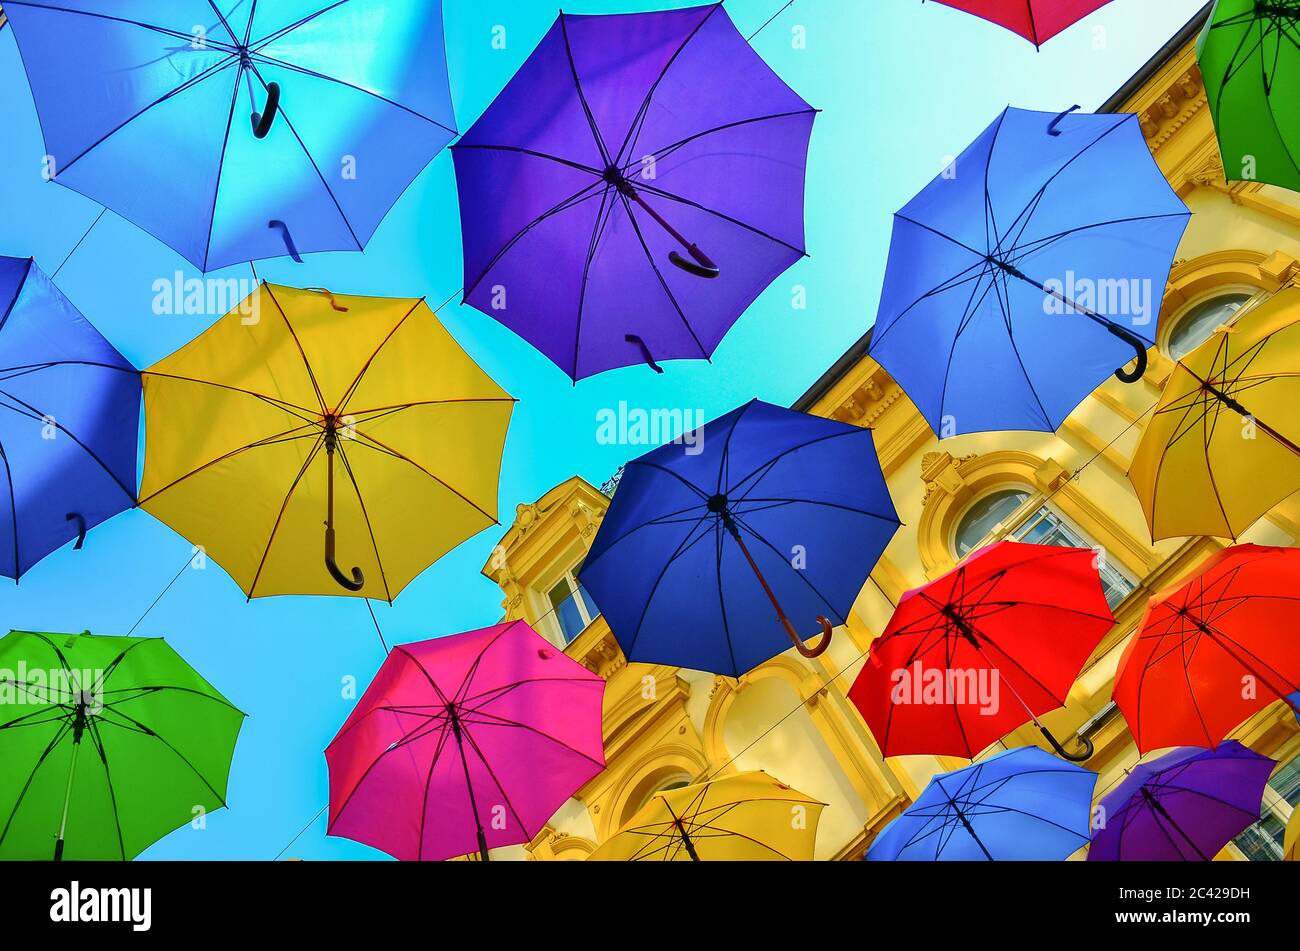 Street decoration, lots of colorful umbrellas in the air, Belgrade, Serbia Stock Photo